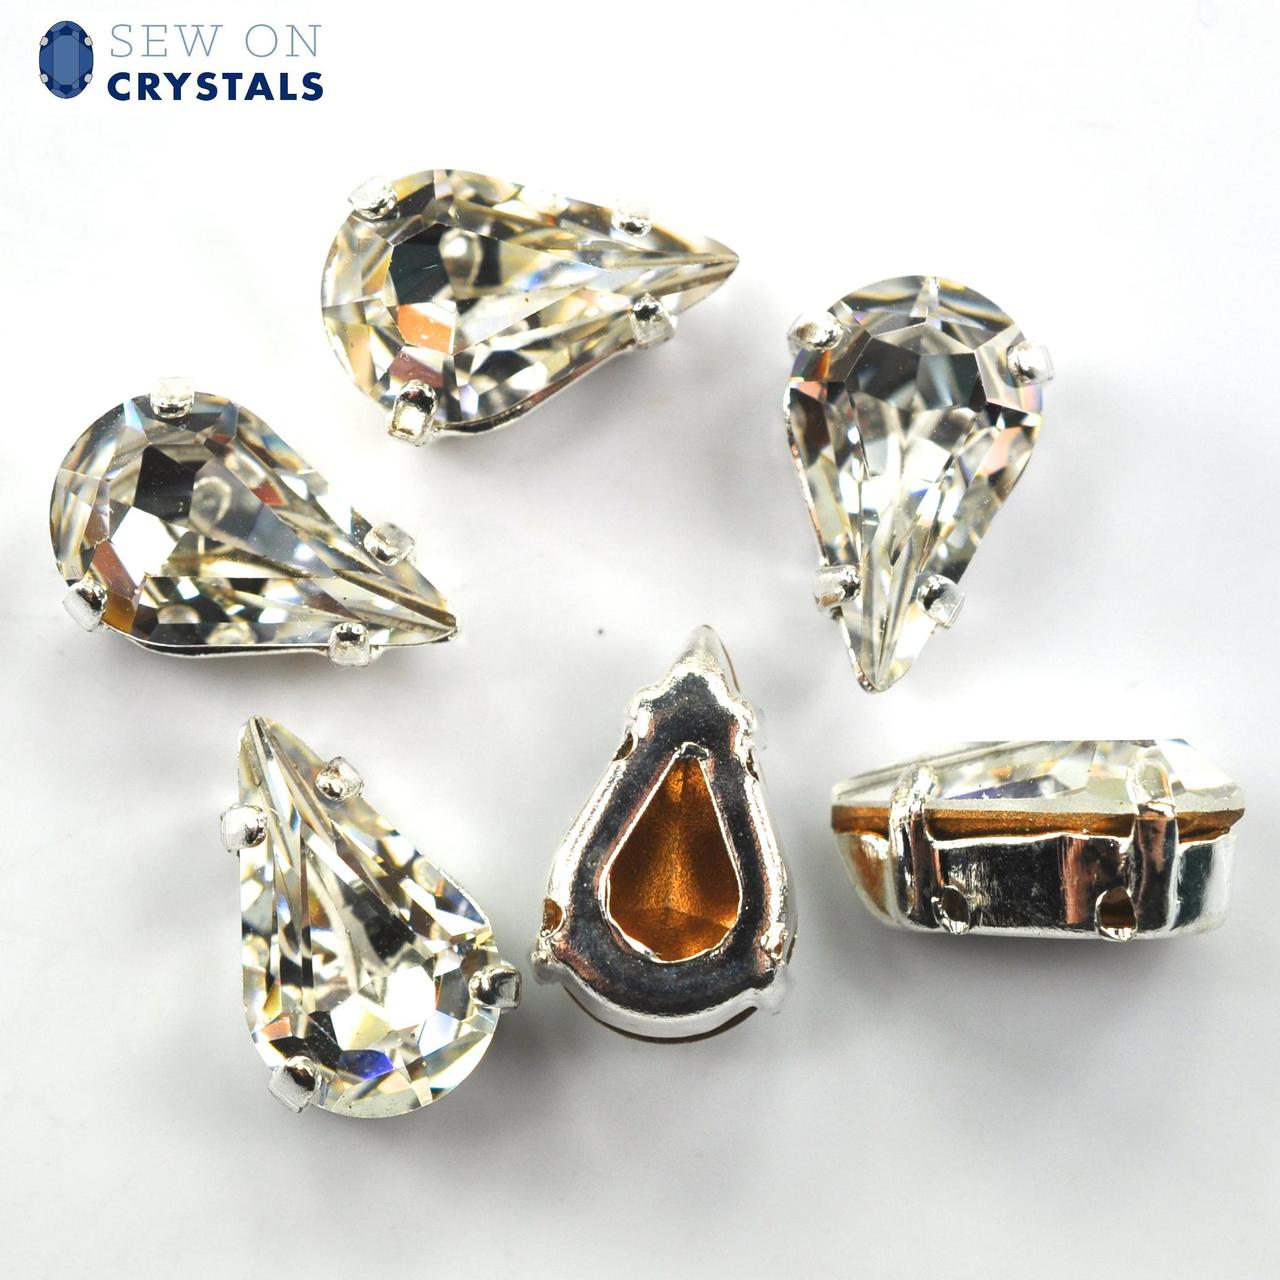 Crystal 13x7.8mm Pear Sew On Crystals - 6 Pieces